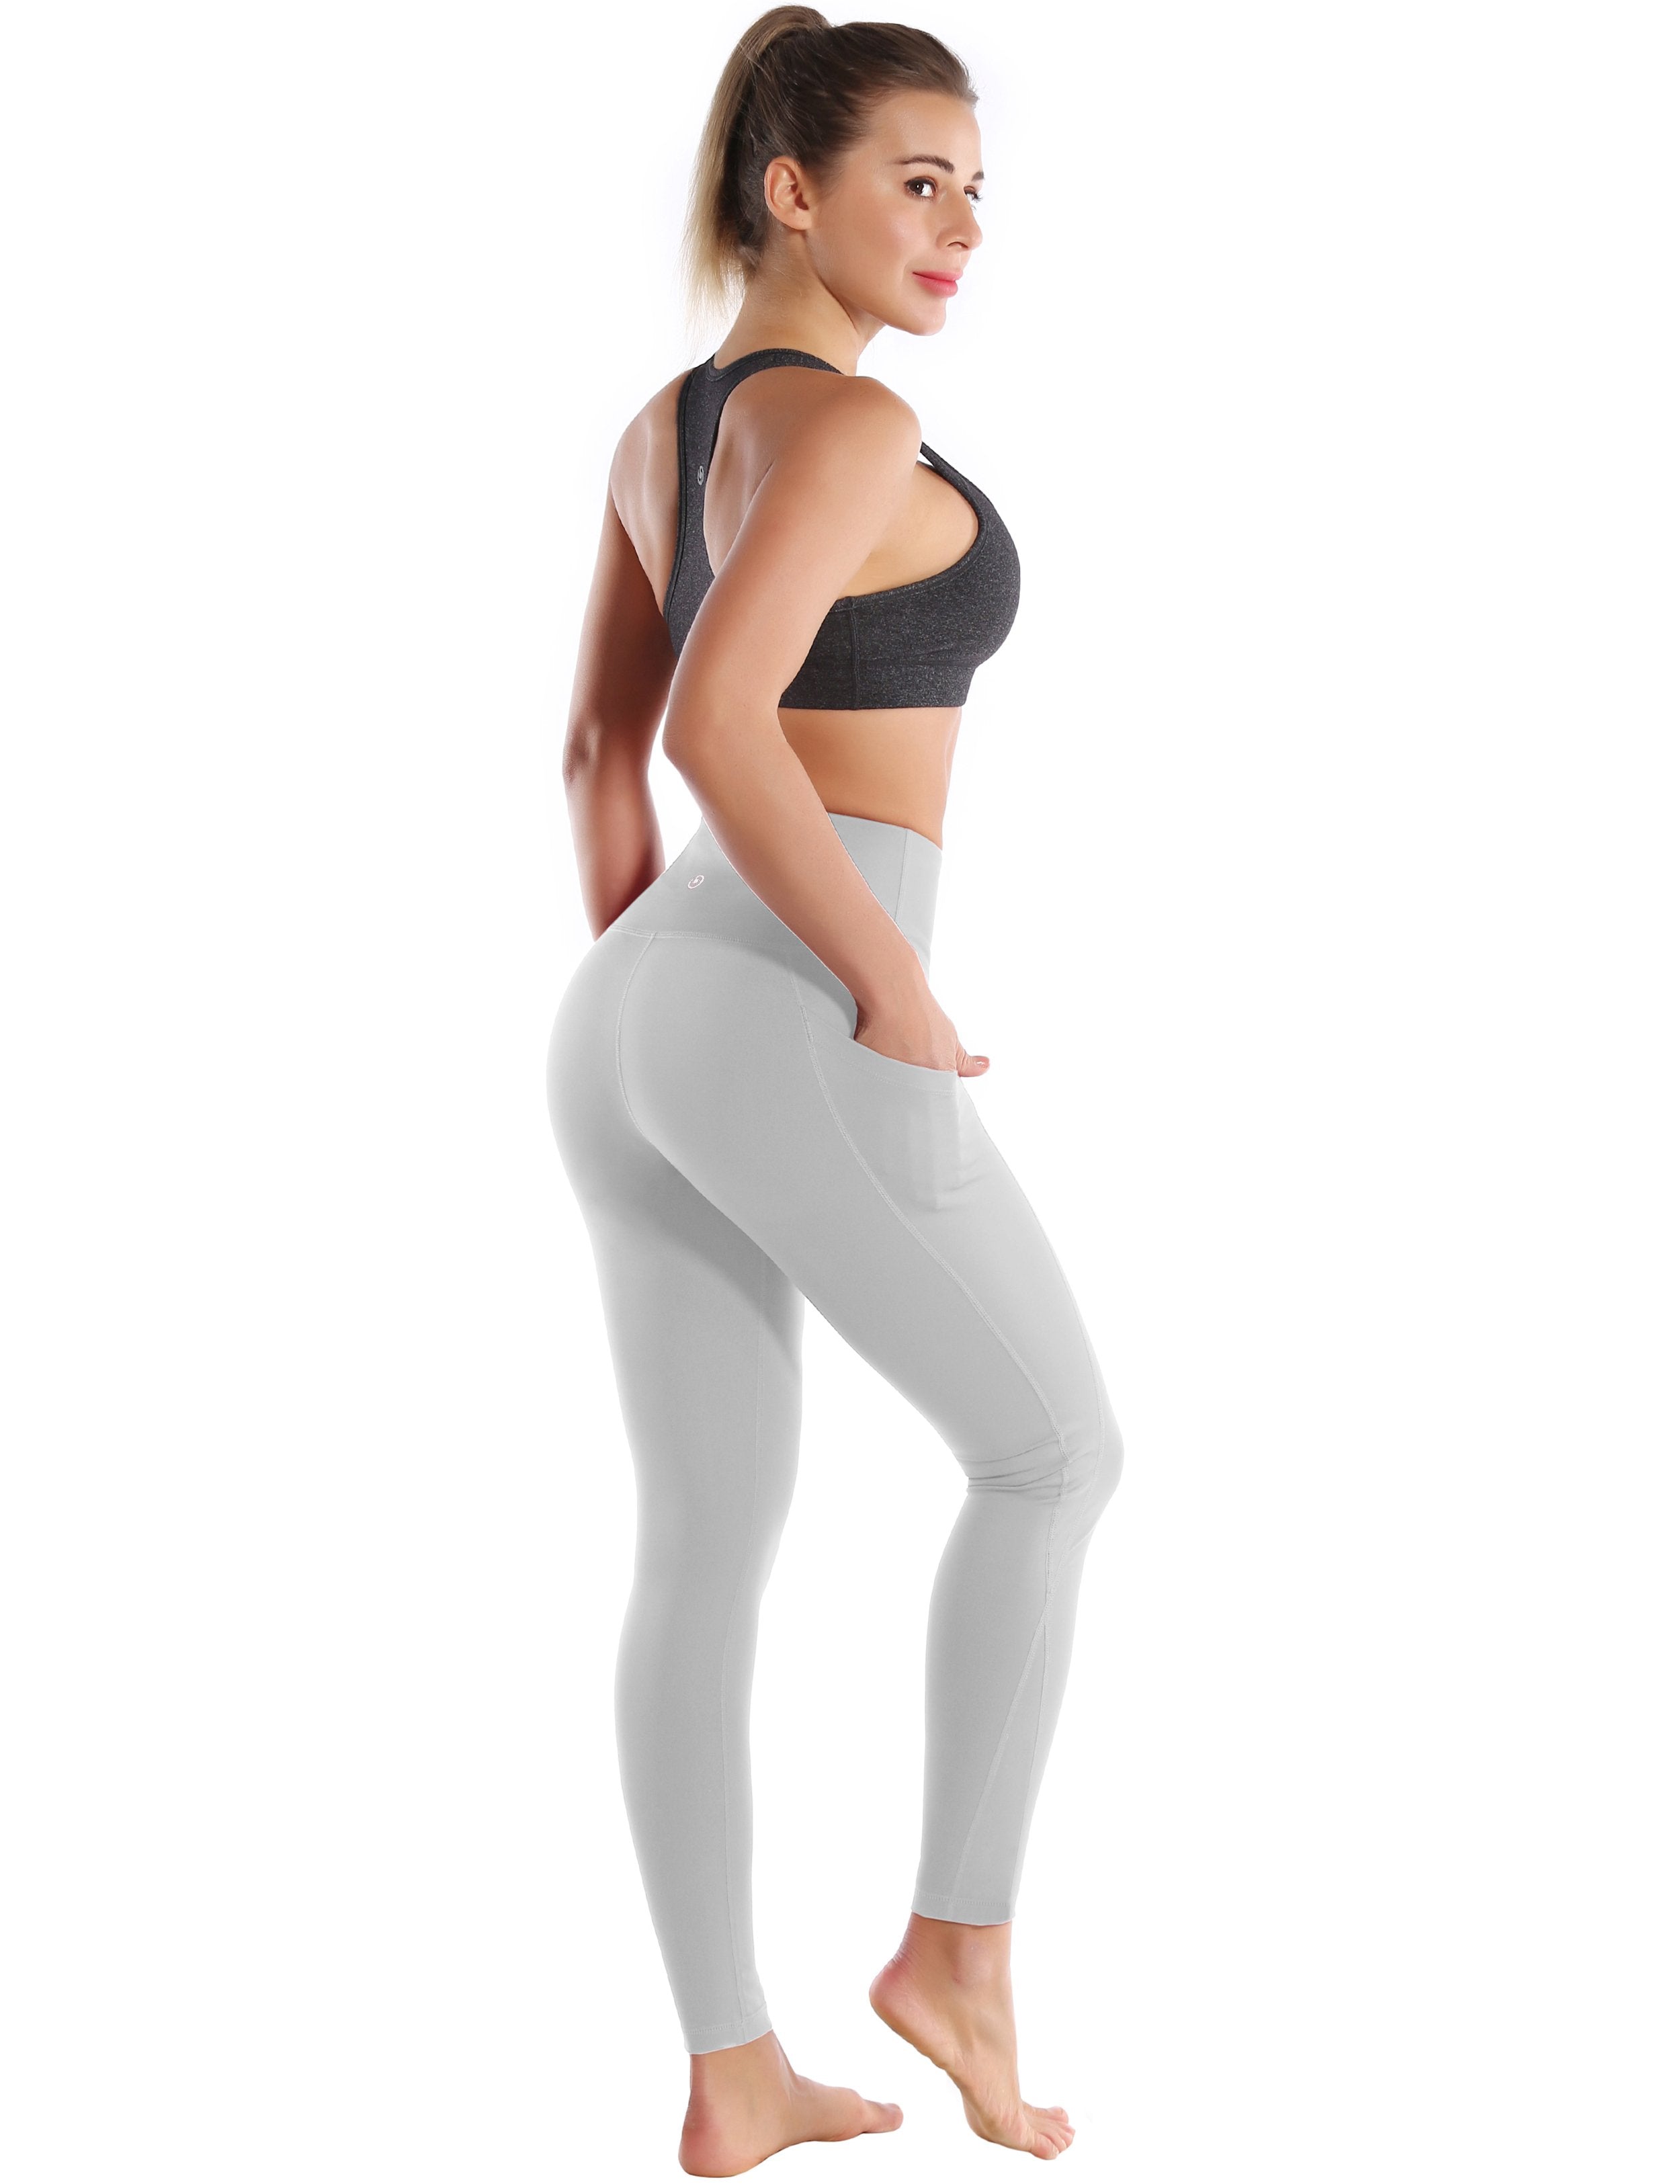 High Waist Side Pockets Golf Pants lightgray 75% Nylon, 25% Spandex Fabric doesn't attract lint easily 4-way stretch No see-through Moisture-wicking Tummy control Inner pocket